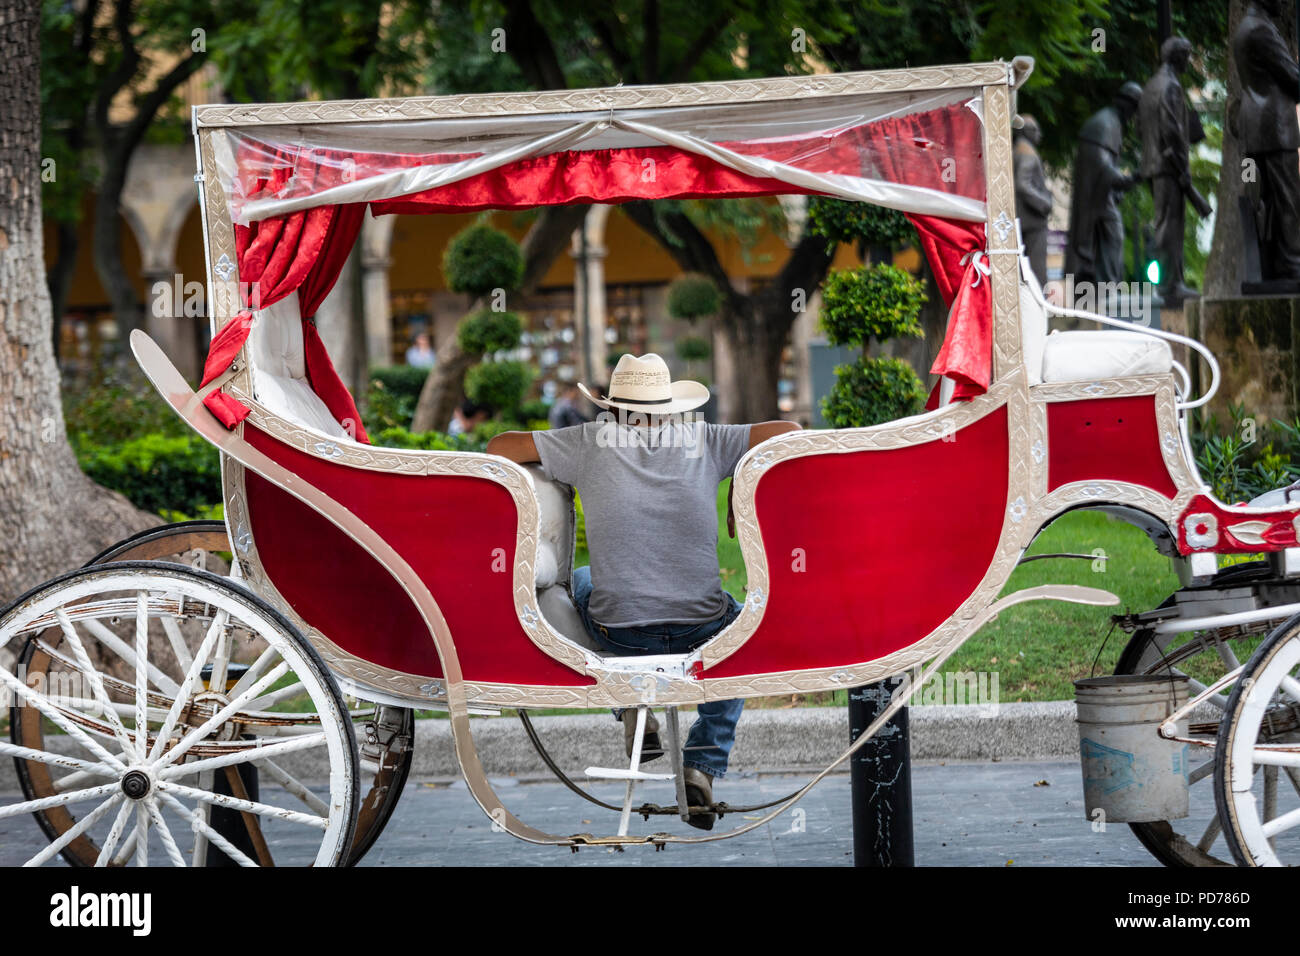 A horse drawn carriage driver waits for customers in downtown Guadalajara, Mexico. Stock Photo